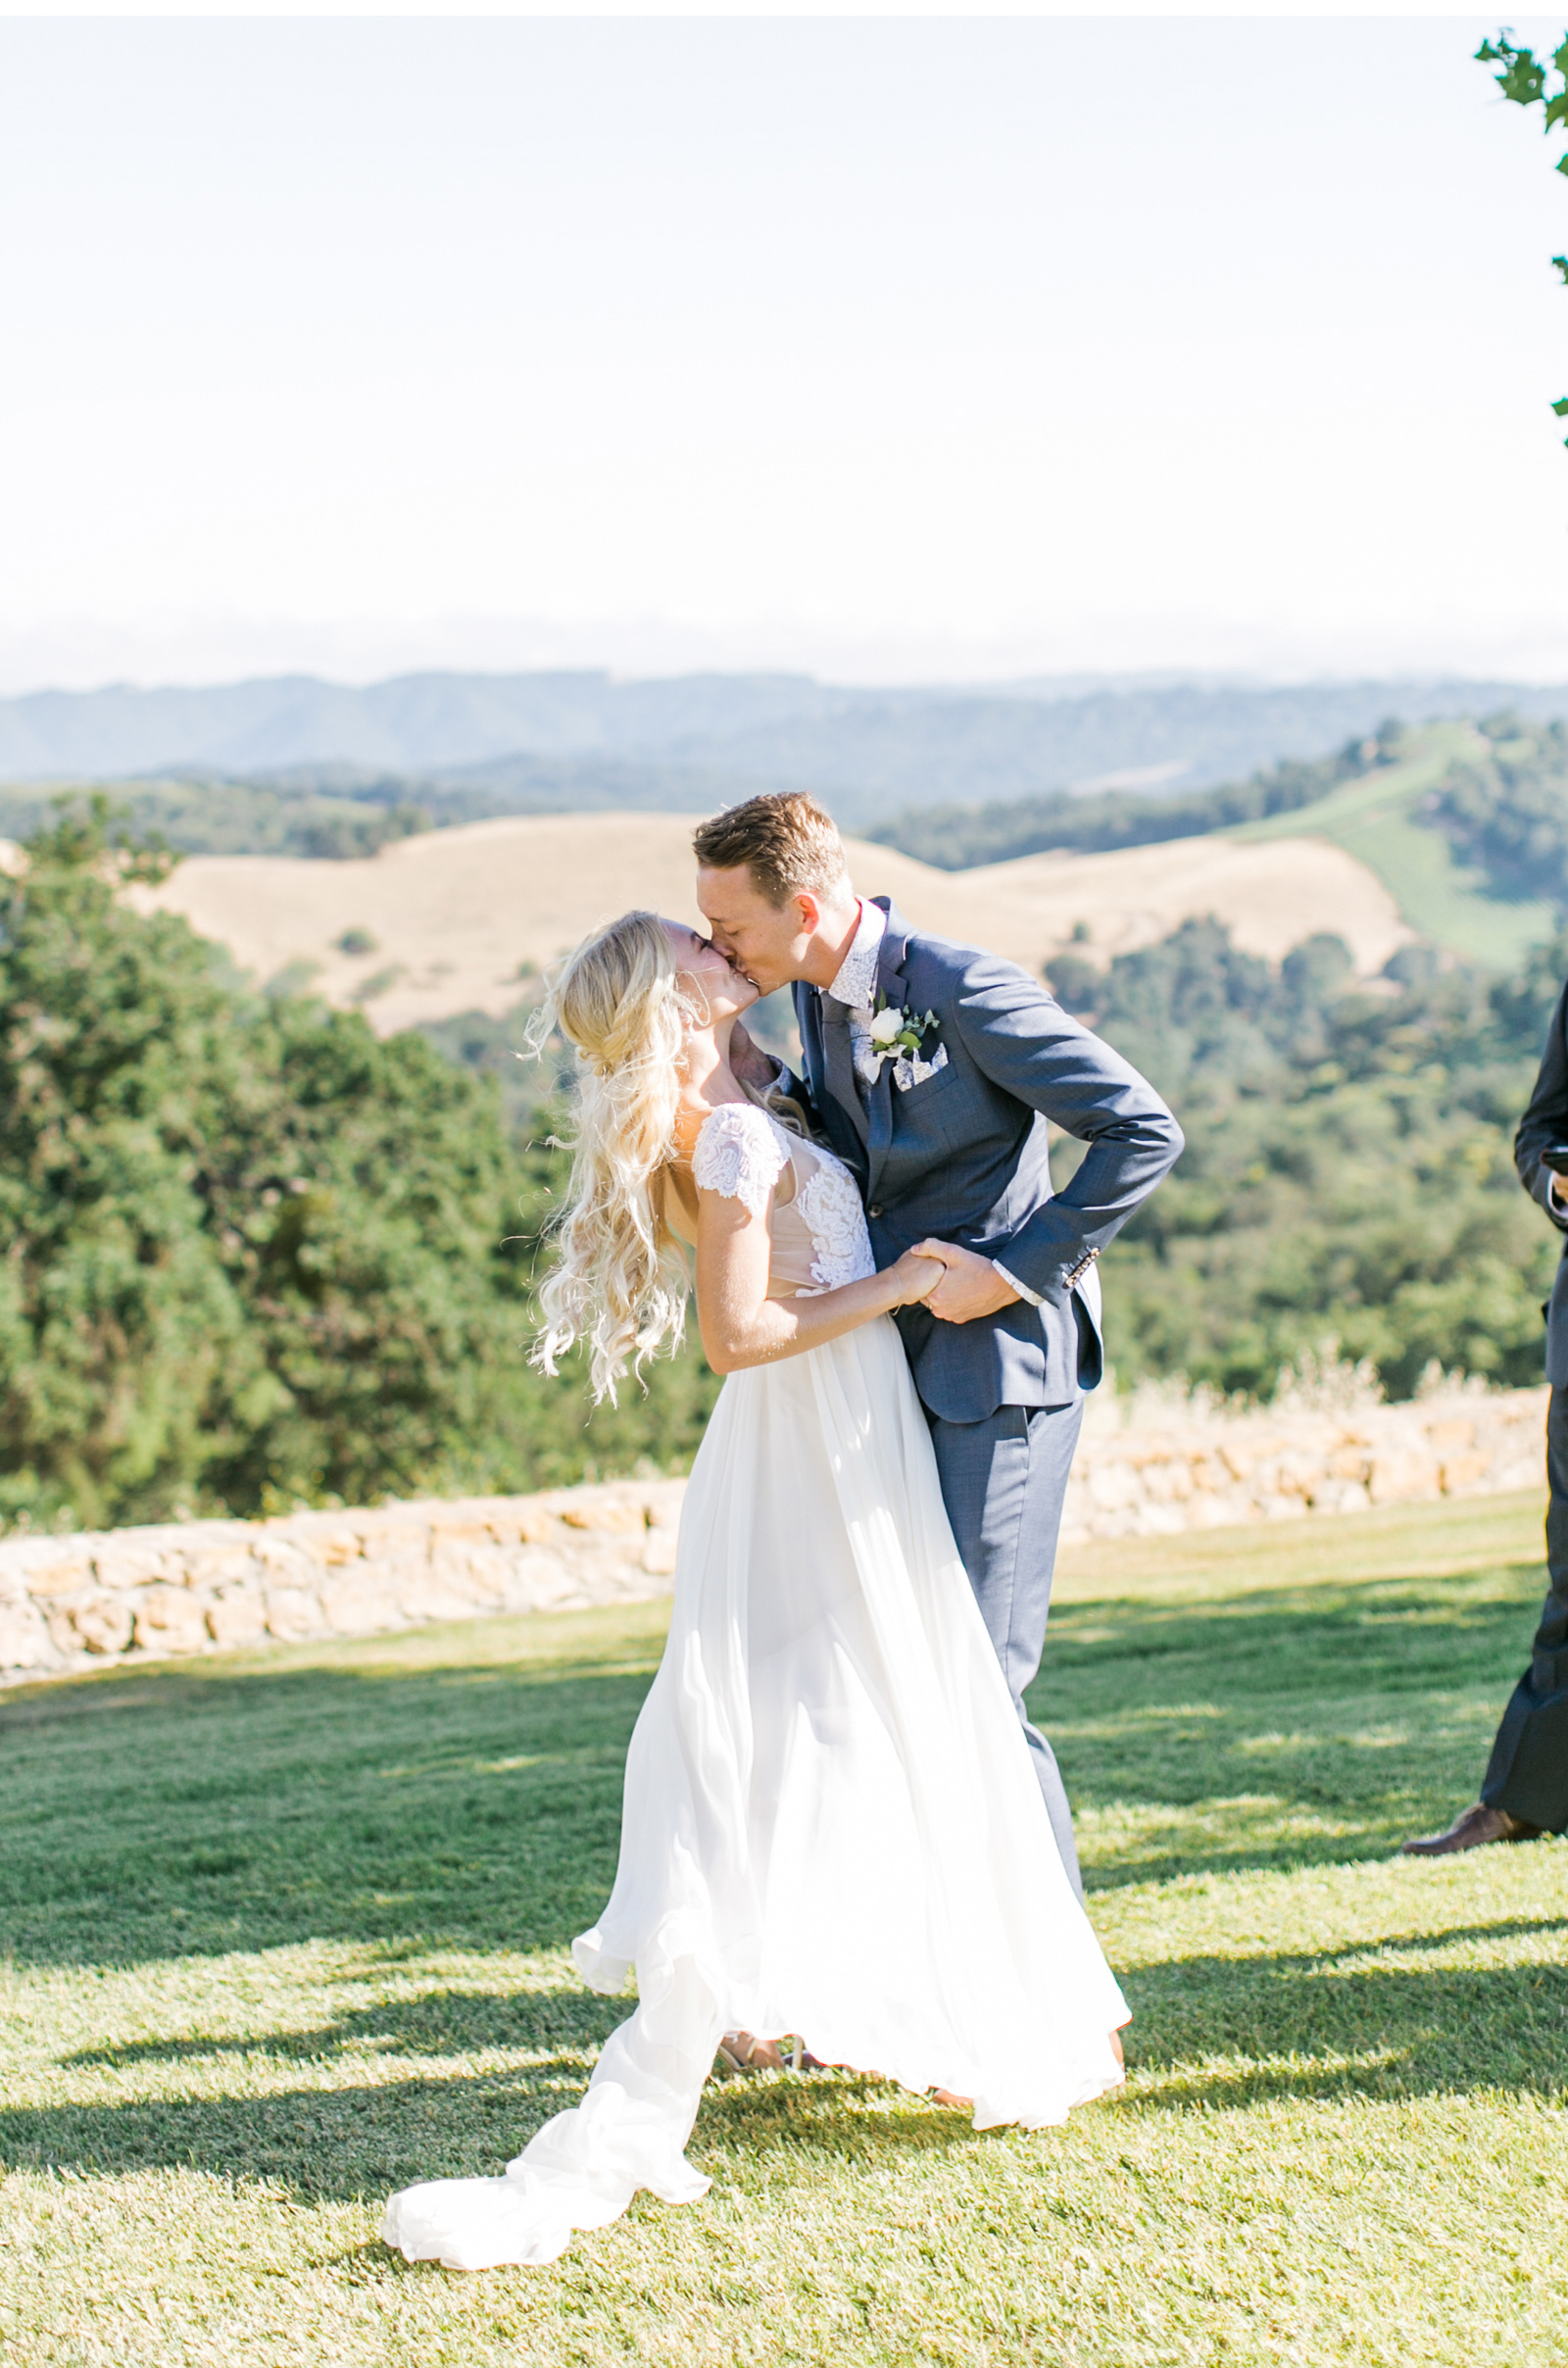 Paso-Robles-Style-Me-Pretty-The-Knot-Wedding-Natalie-Schutt-Photography's-Wedding_11.jpg